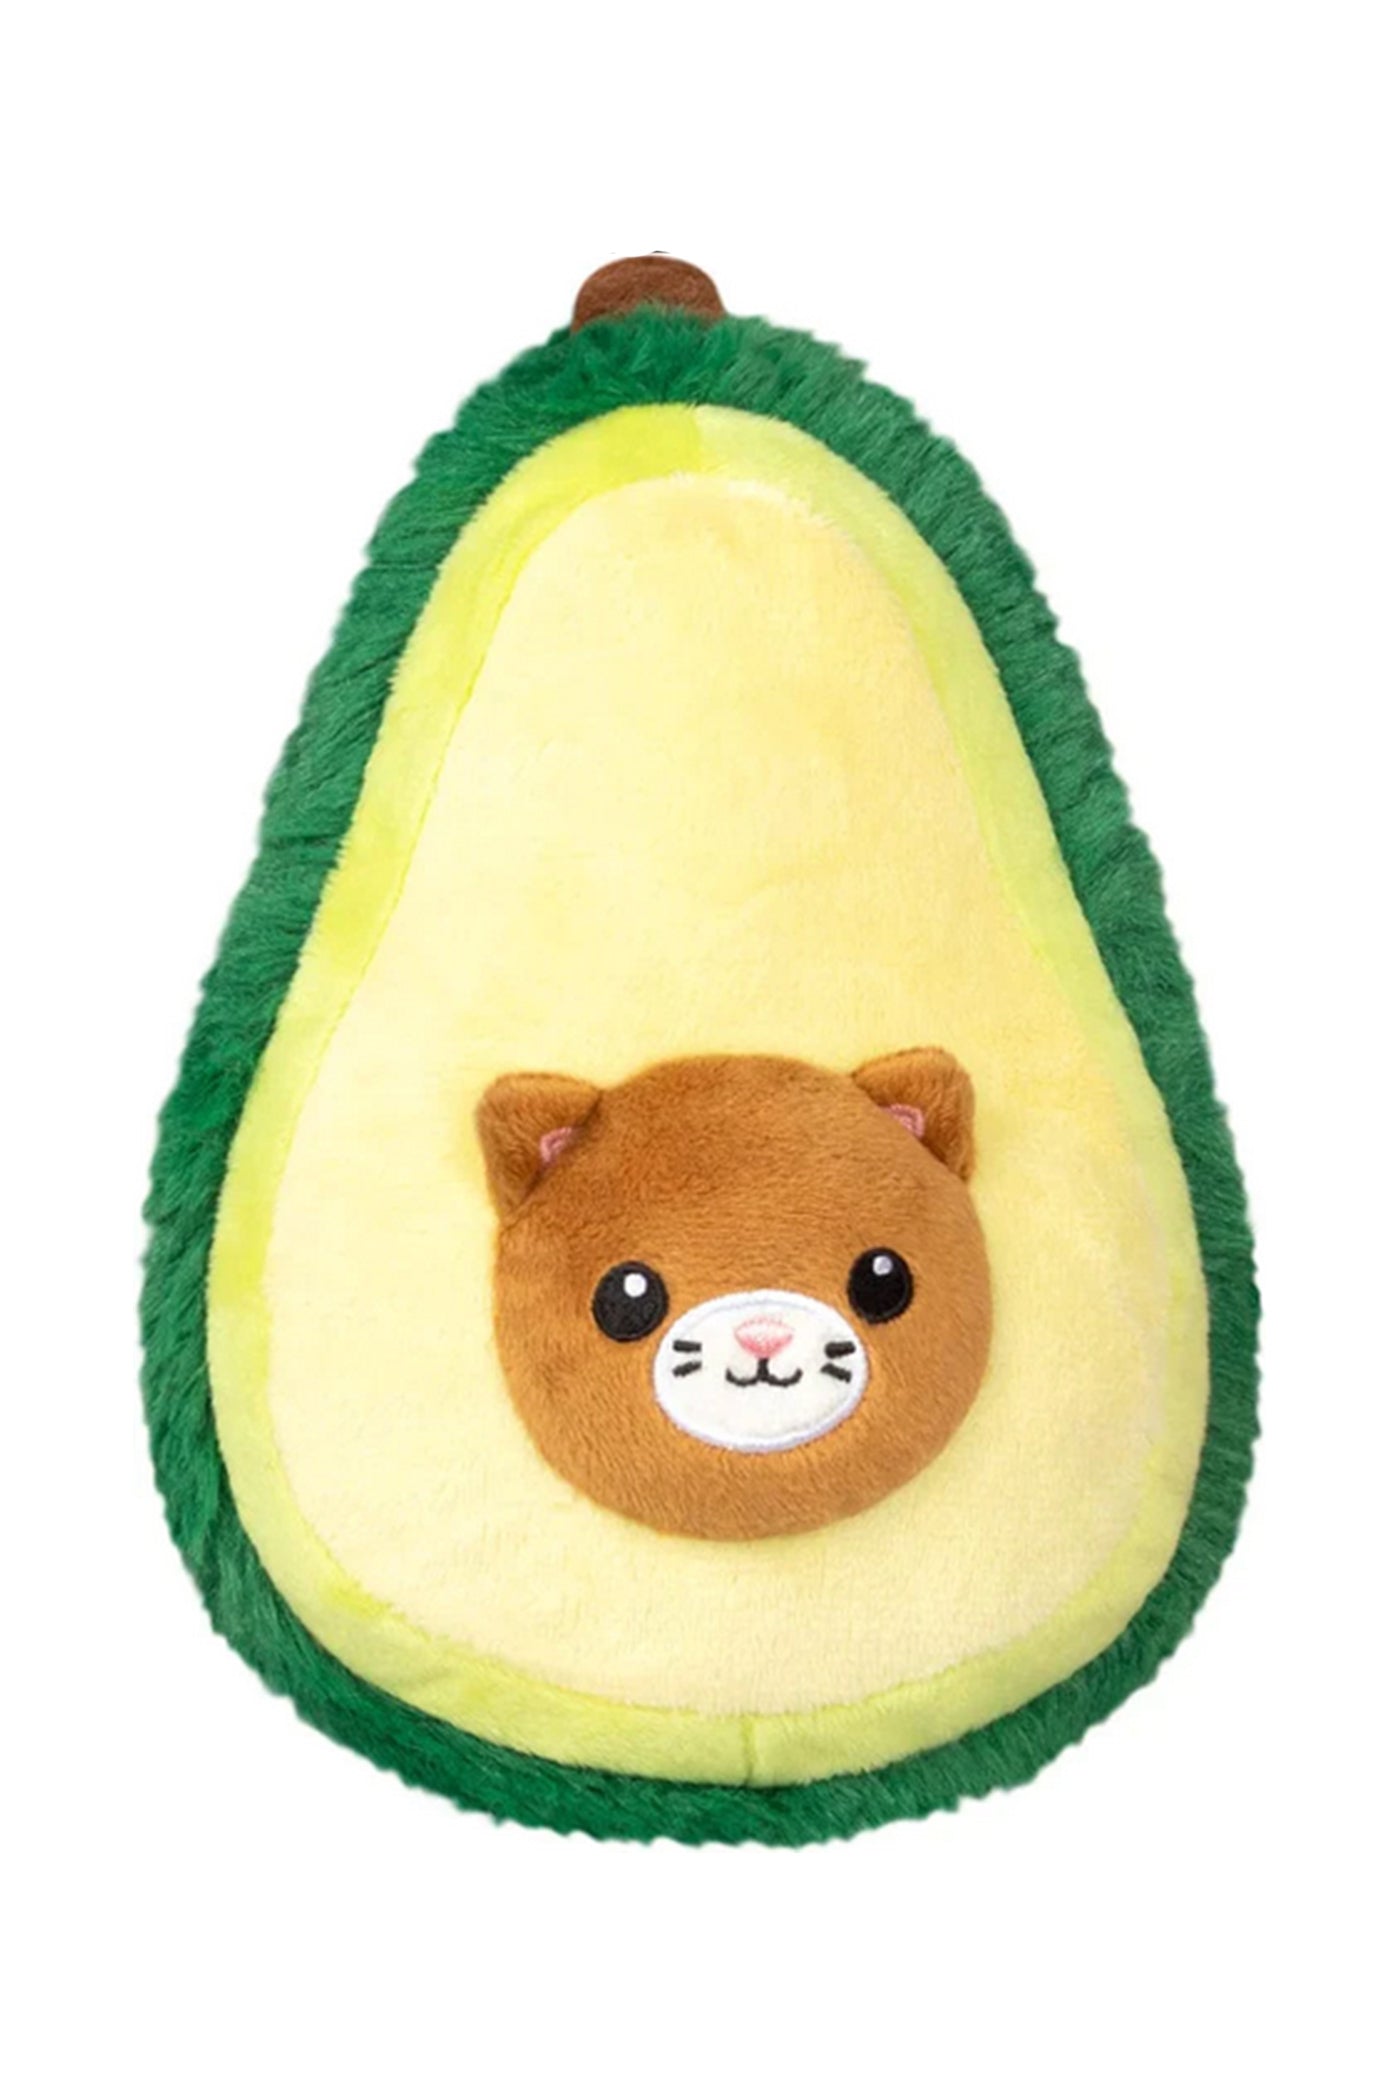 Alter Ego Avocado Cat by Squishable